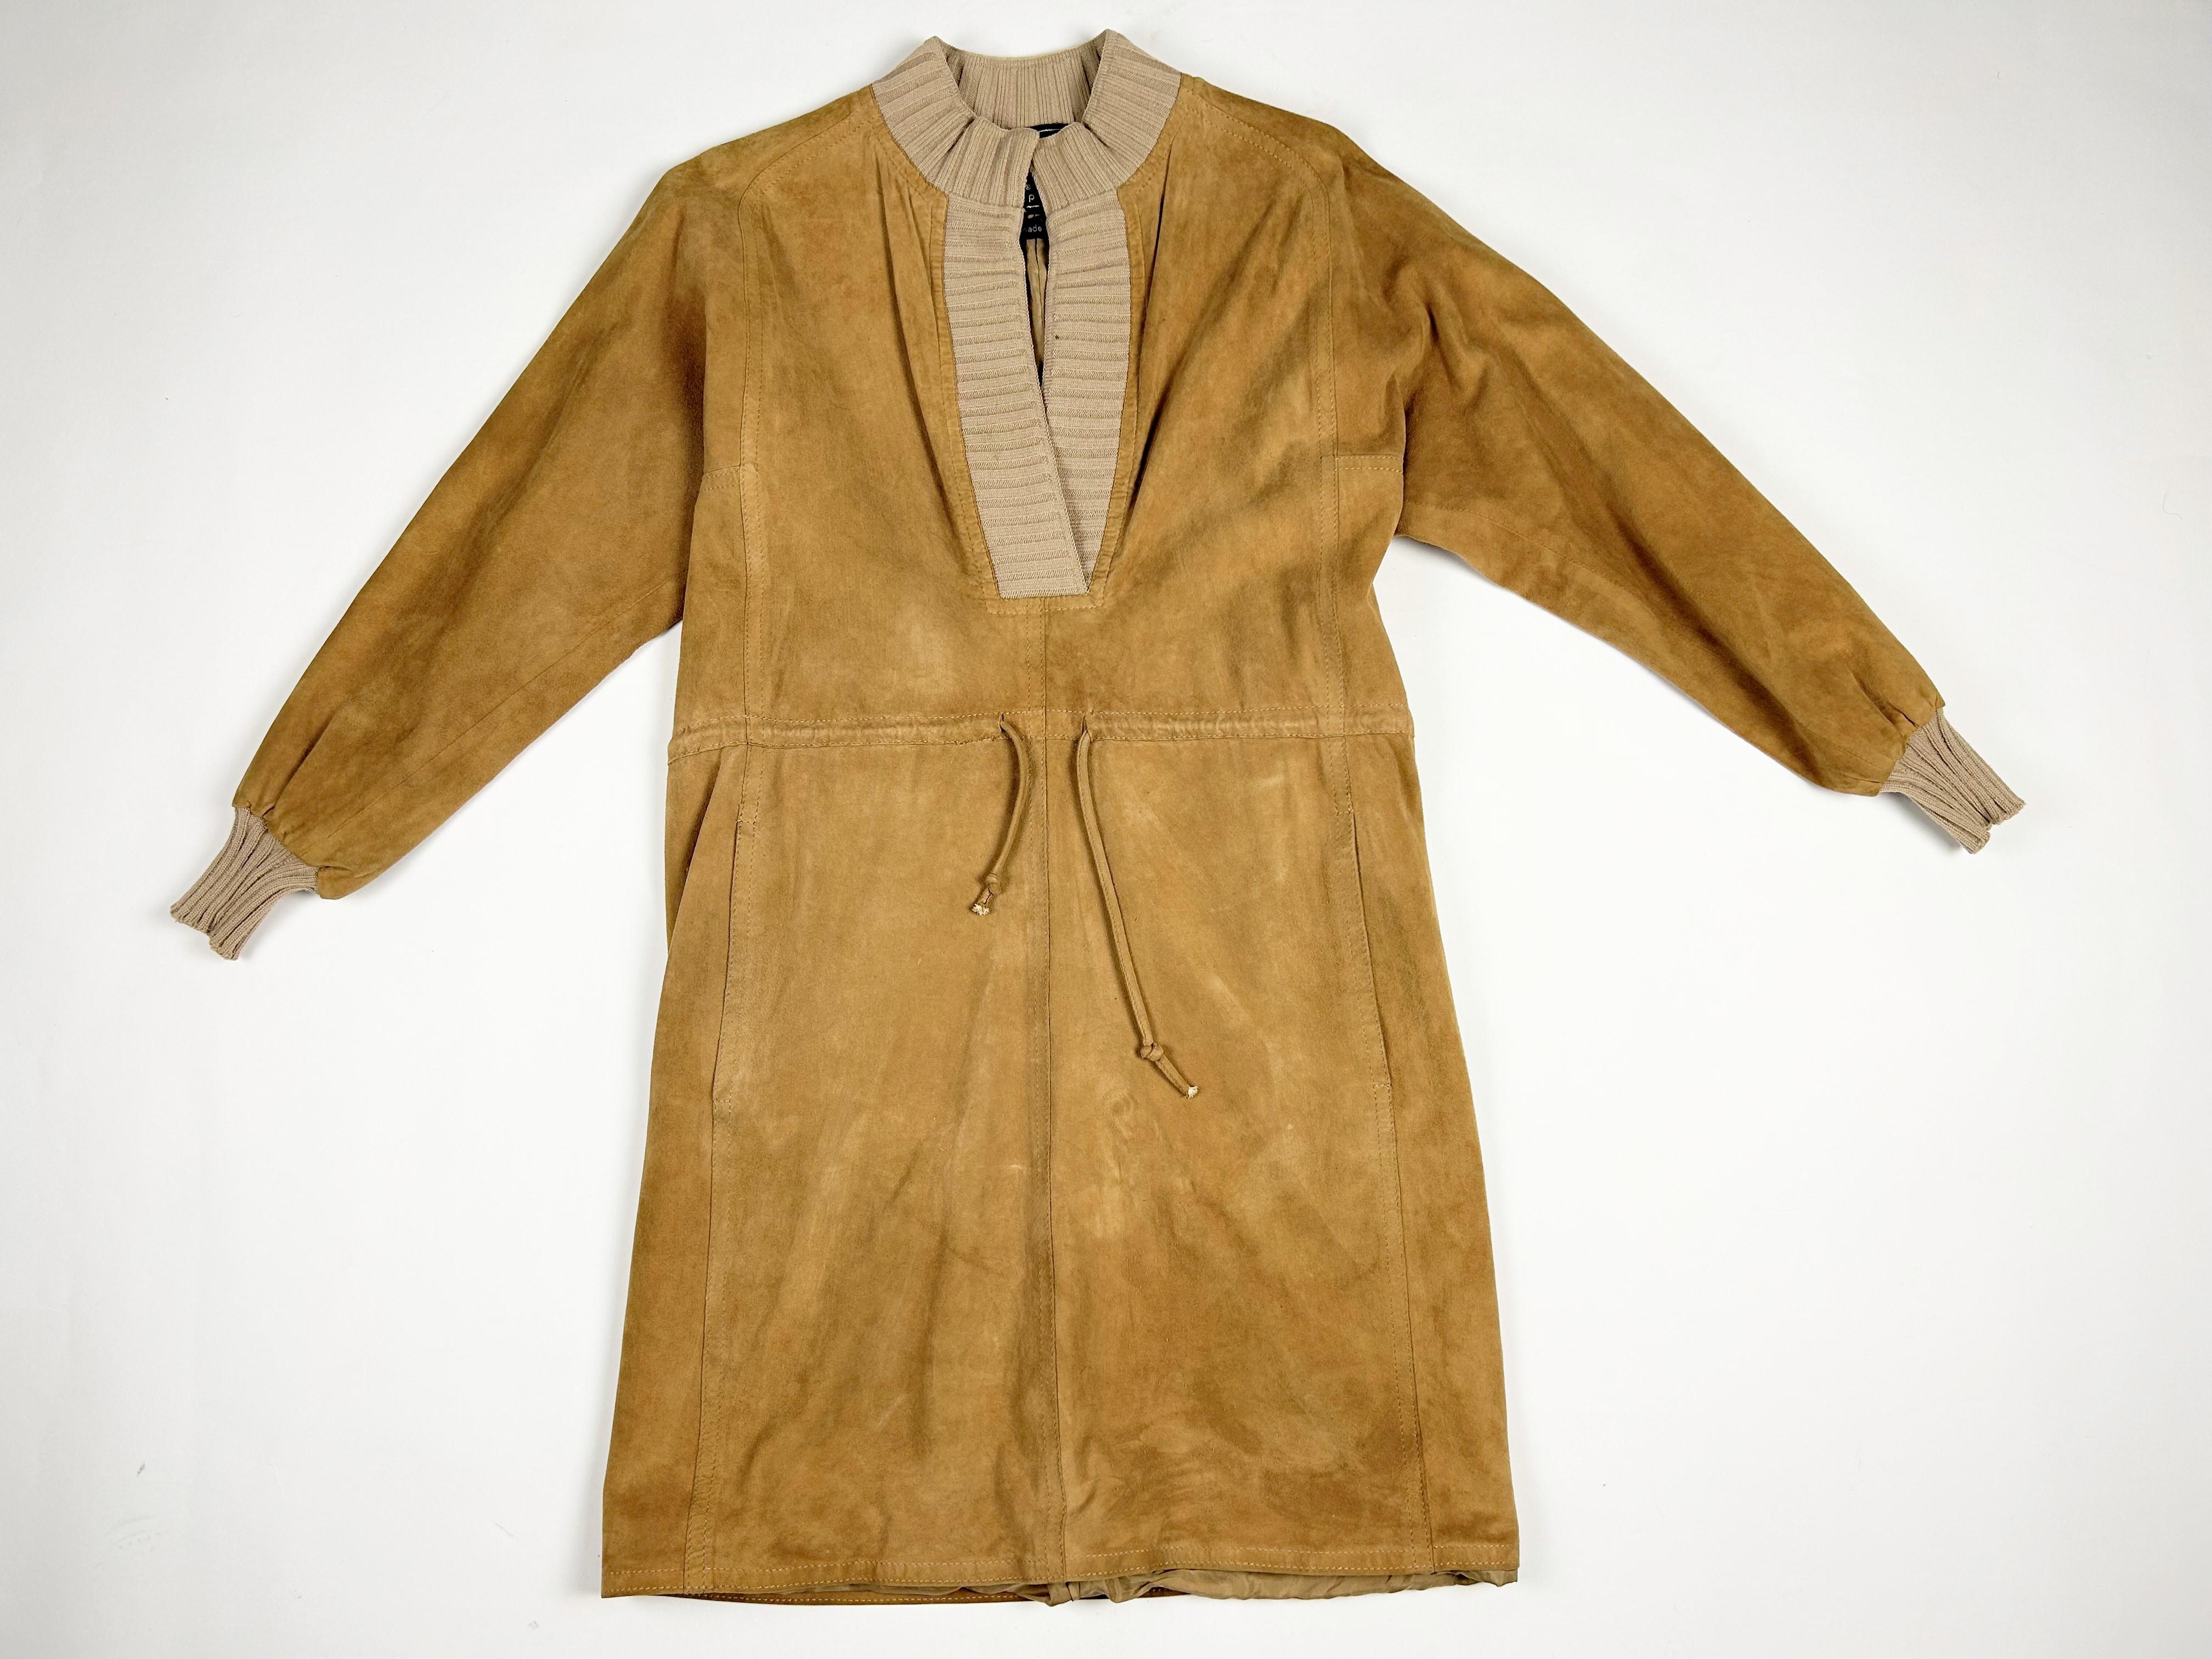 Circa 1982

France

Amazing short safari-style dress in buff-coloured suede by Emanuel Ungaro Parallèle dating from the early 1980s. Straight cut with puffed sleeves and stitched inserts. Beige stretch knit with turtleneck effect collar and cuffs.